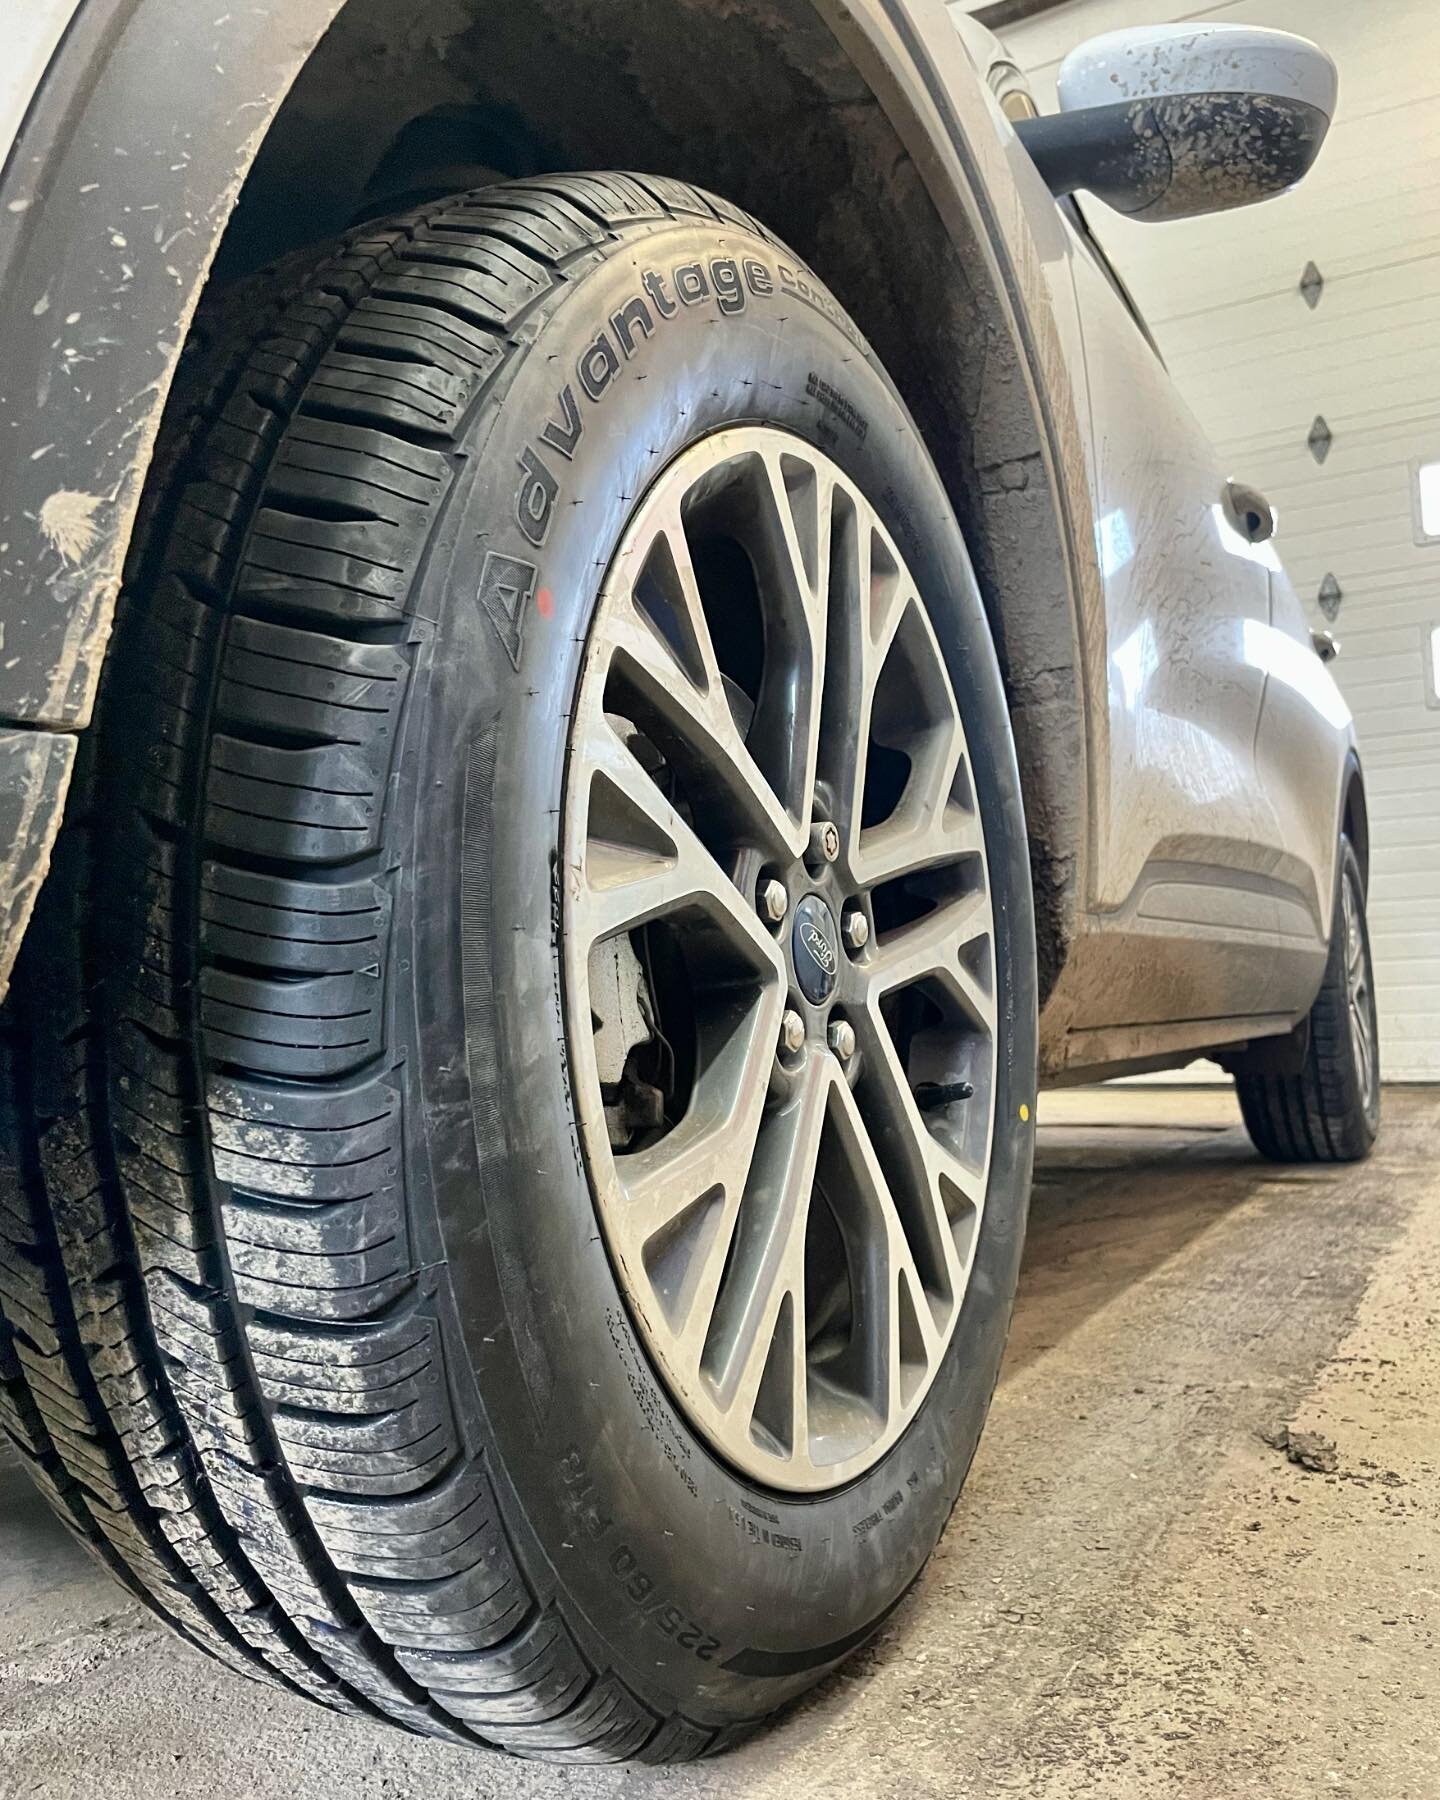 Looking for a solid set of tires for your vehicle this summer? Check out the @bfgoodrichtires Advantage Controls! Rated for 120,000 kilometres, they&rsquo;re made to keep you rolling. Take advantage of the rebates on now and call for a quote today! #